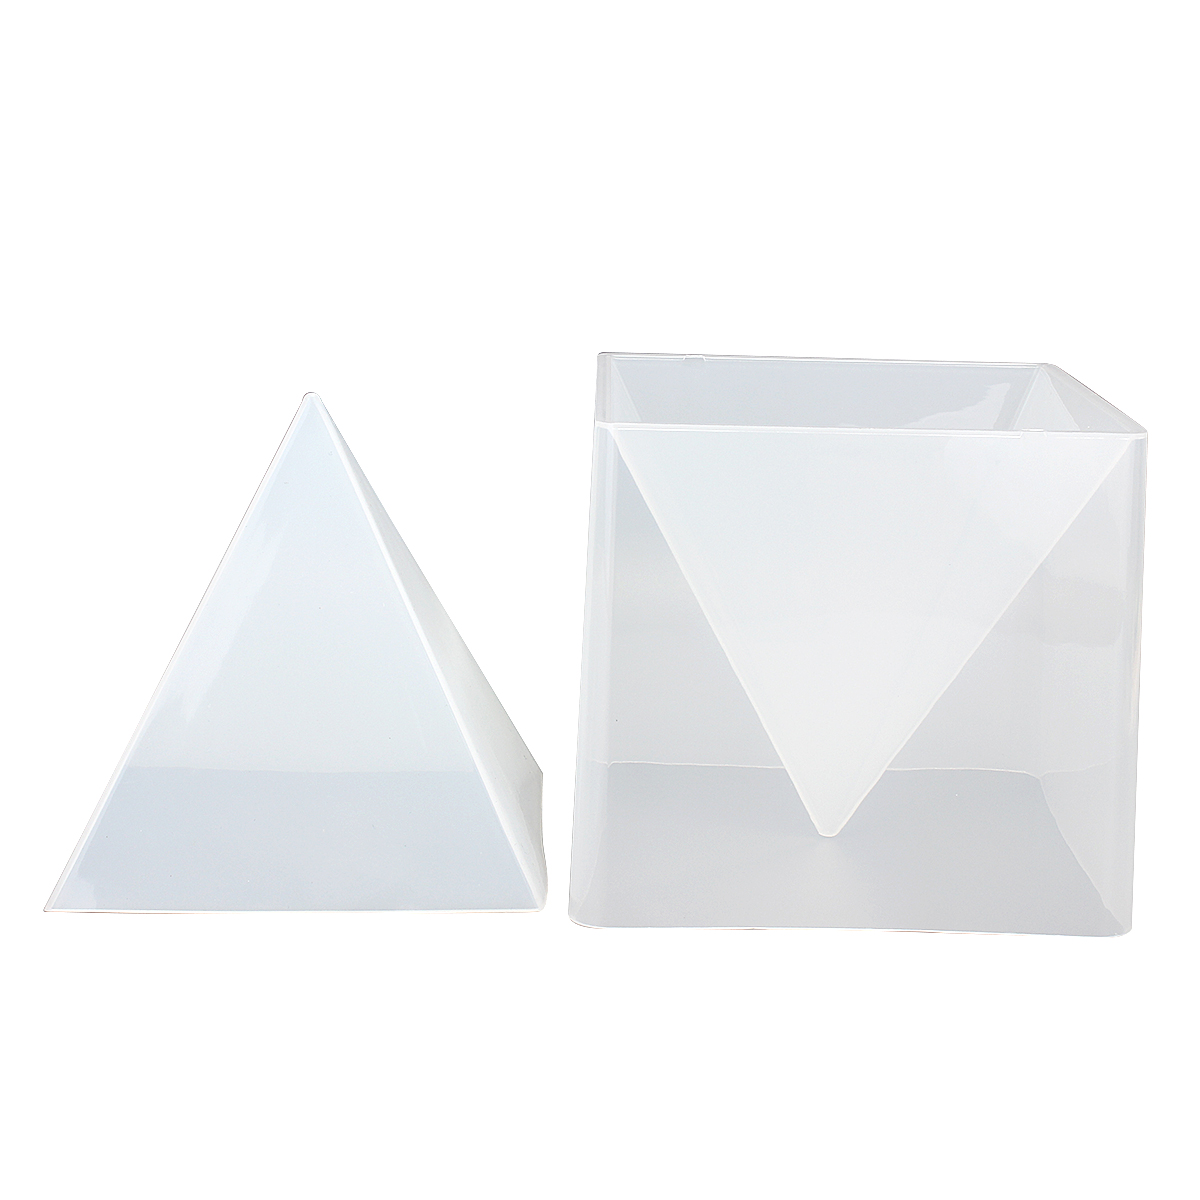 Super-Pyramid-Silicone-Mould-DIY-Resin-Decorative-Craft-Jewelry-Making-Mold-DIY-Jewelry-1276083